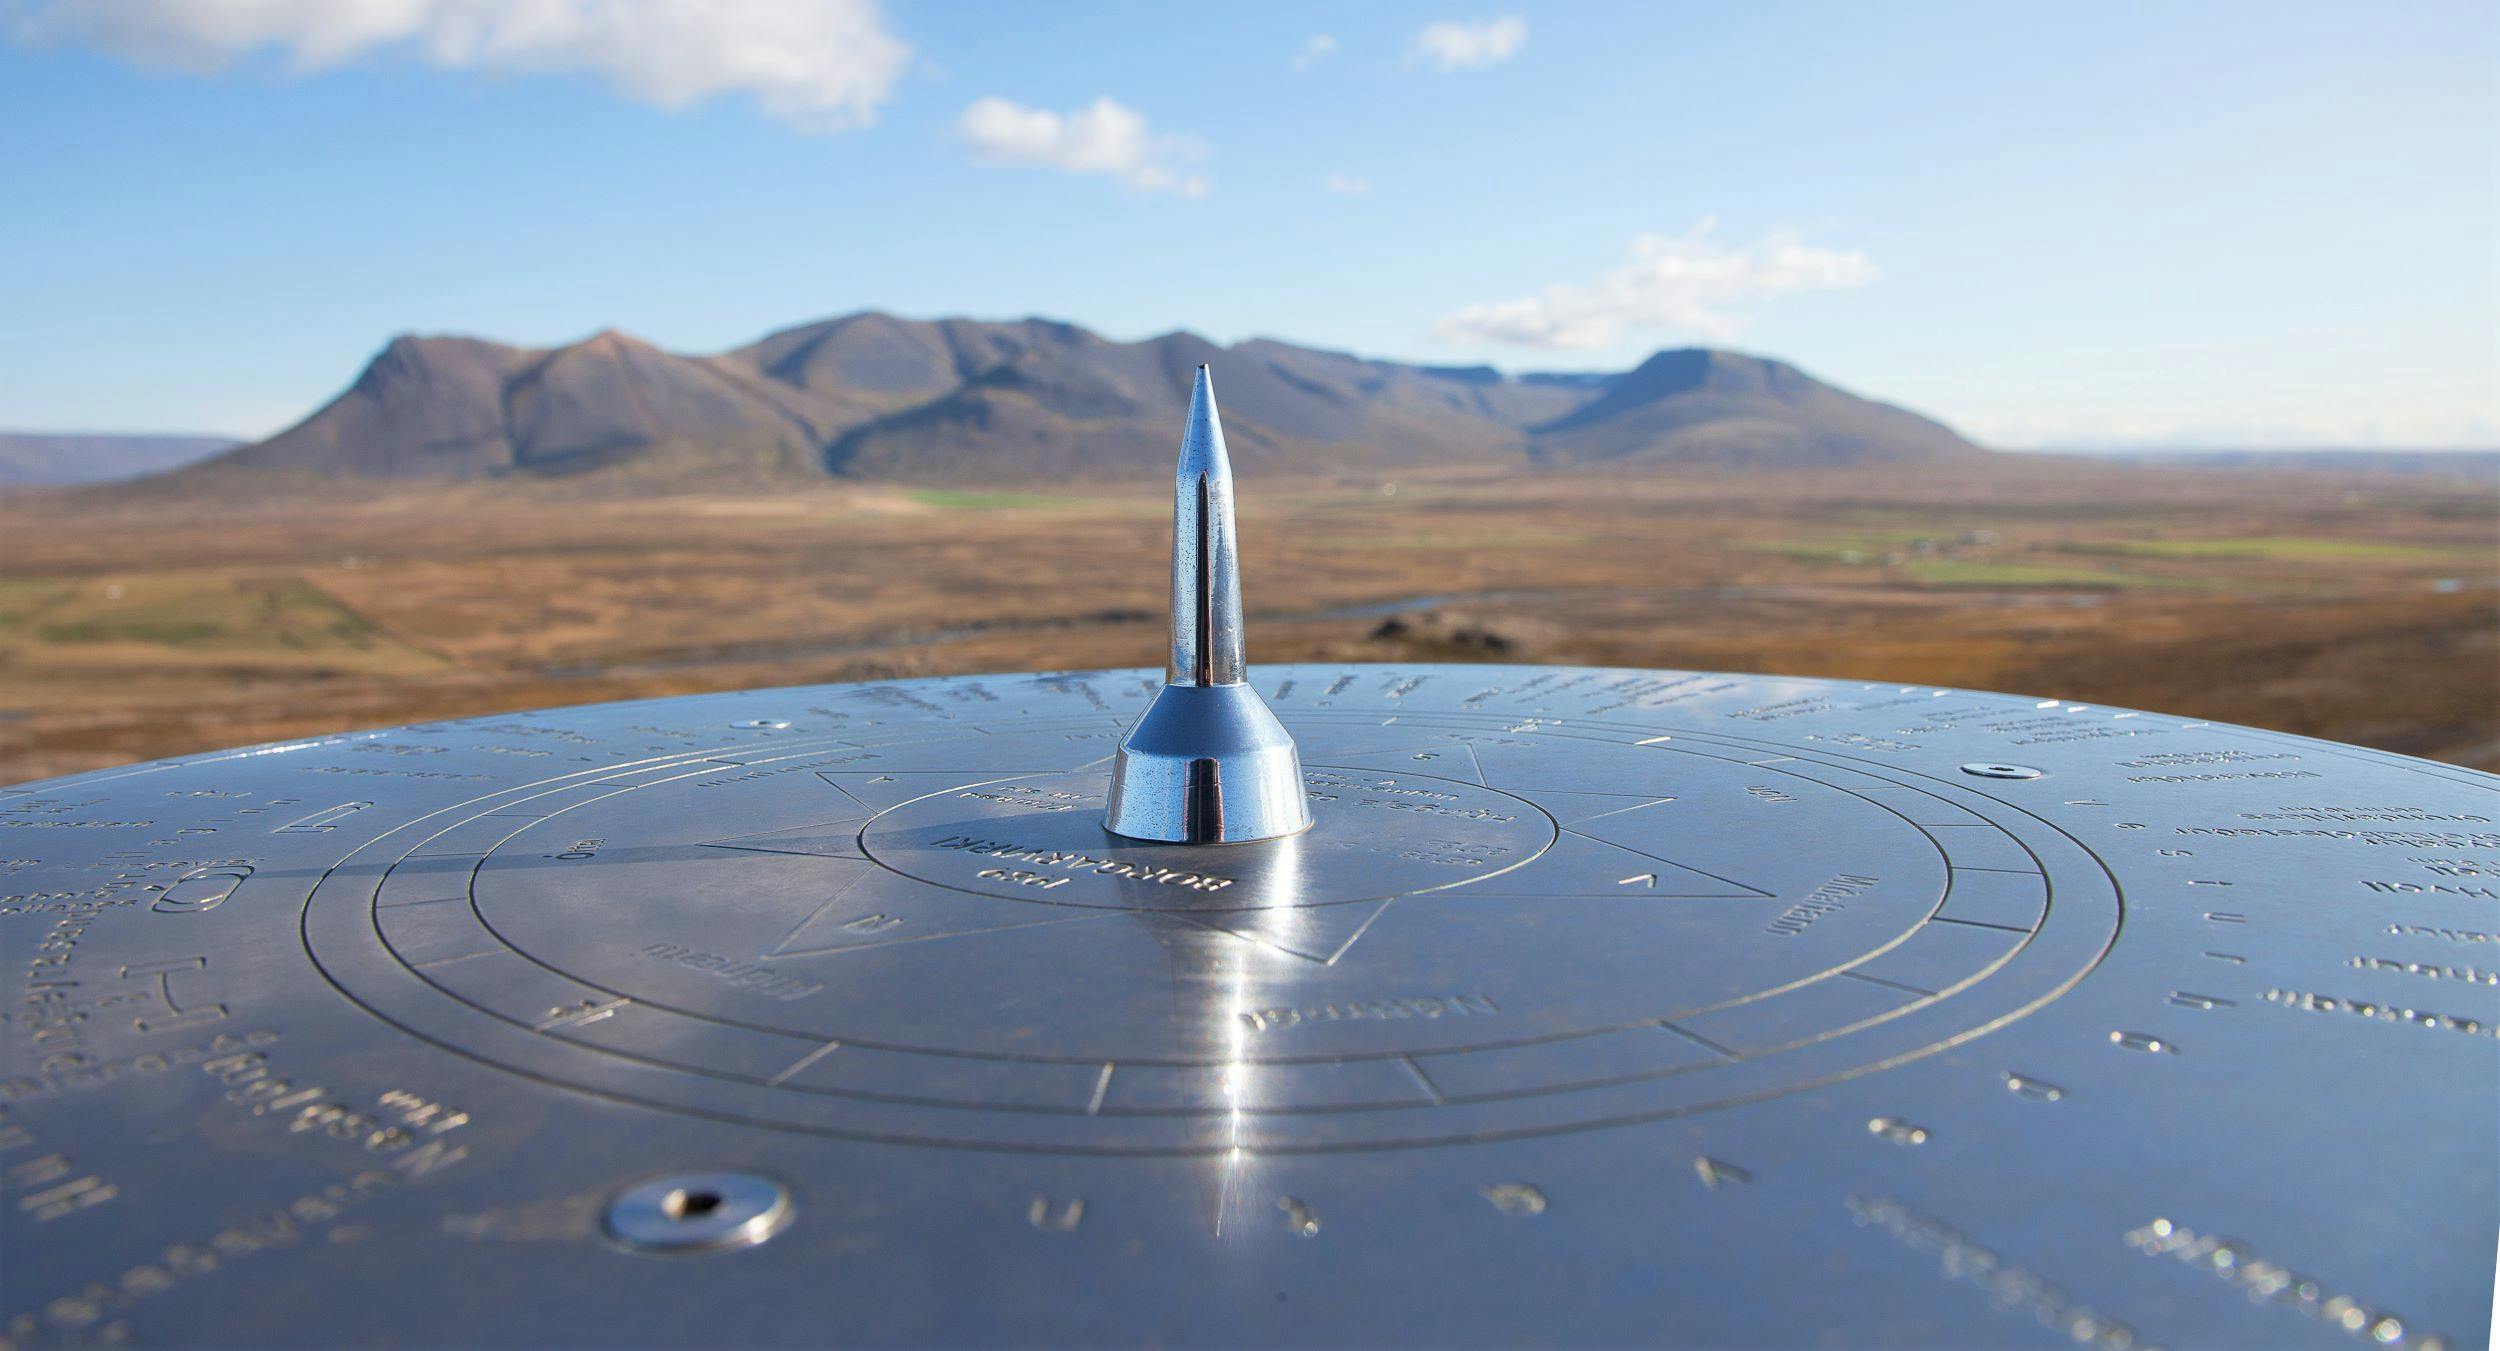 Closeup of a compass at Borgarvirki in the foreground, mountain group in the background